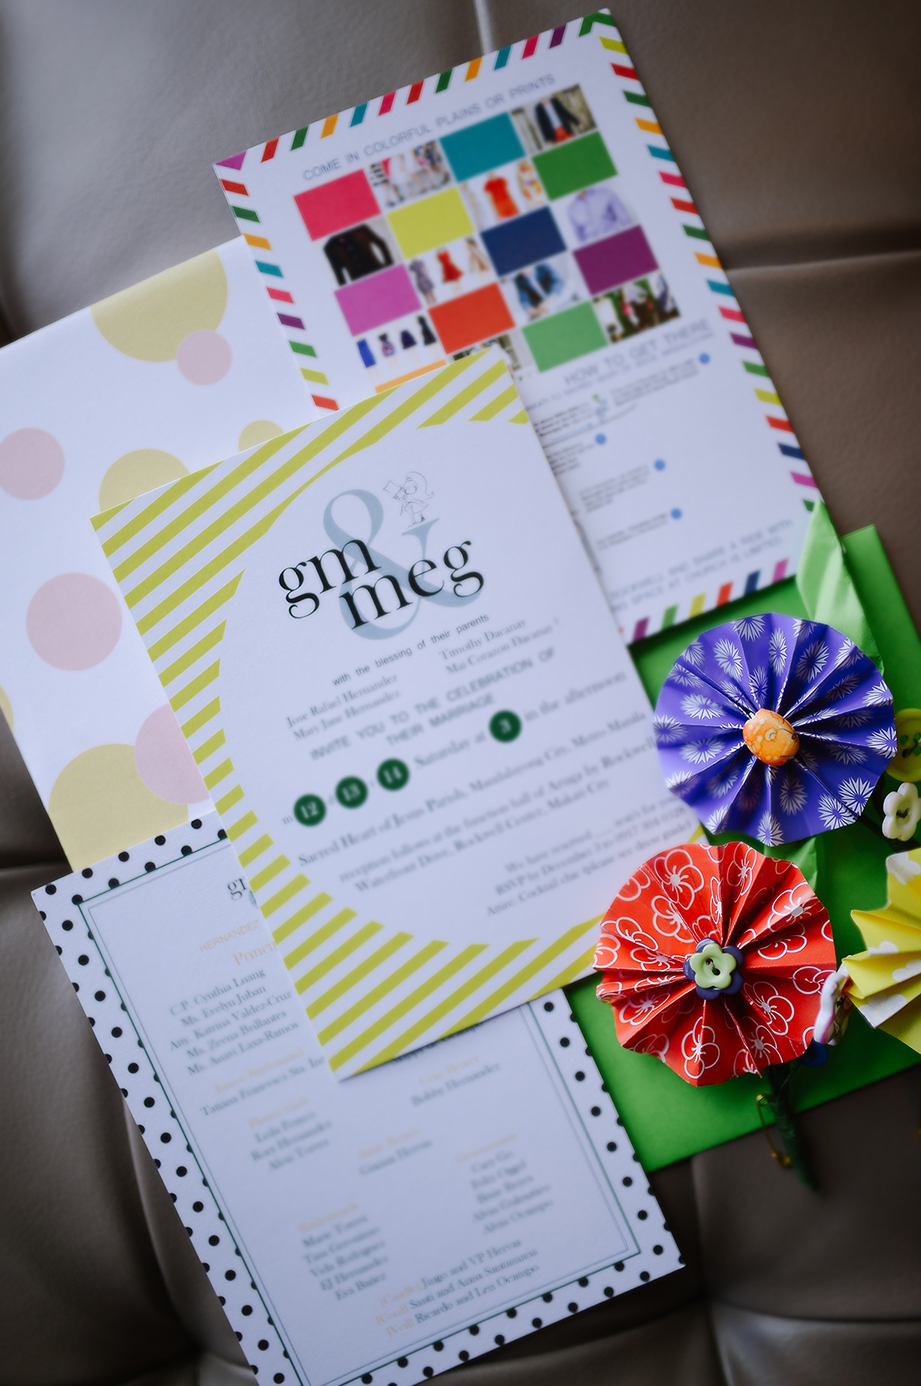 Kate Spade inspired wedding with handmade decors and DIY prints. Story published on Metro Mom by Meghann Hernandez